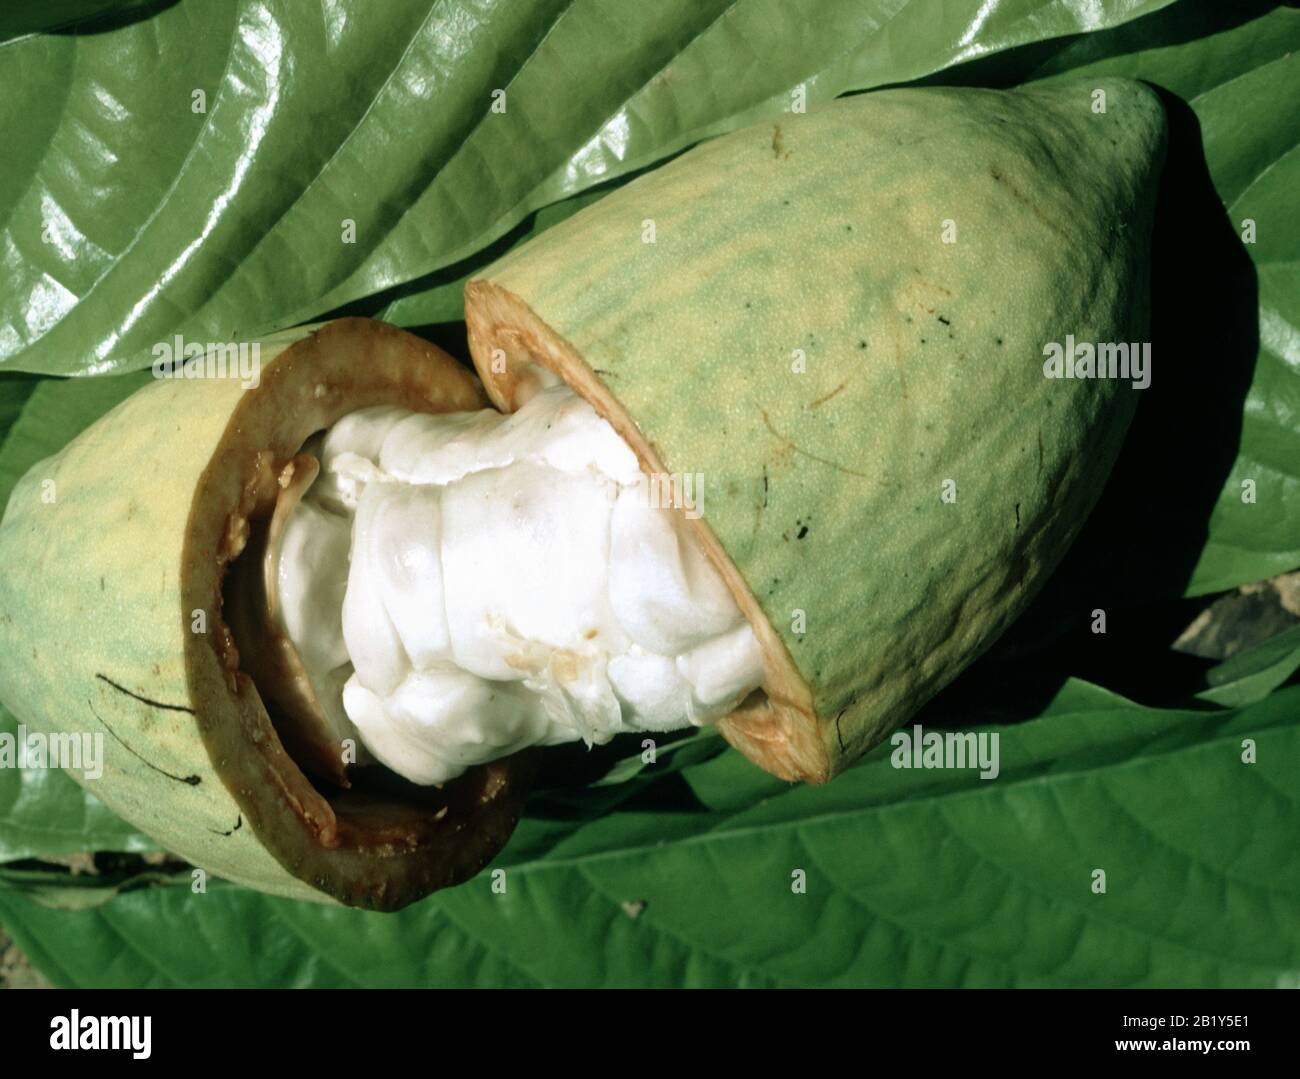 An opened coacoa (Theobroma cacao) pod to show beans and white pulp which can be used in drinks and smoothies, Malaysia, February. Stock Photo